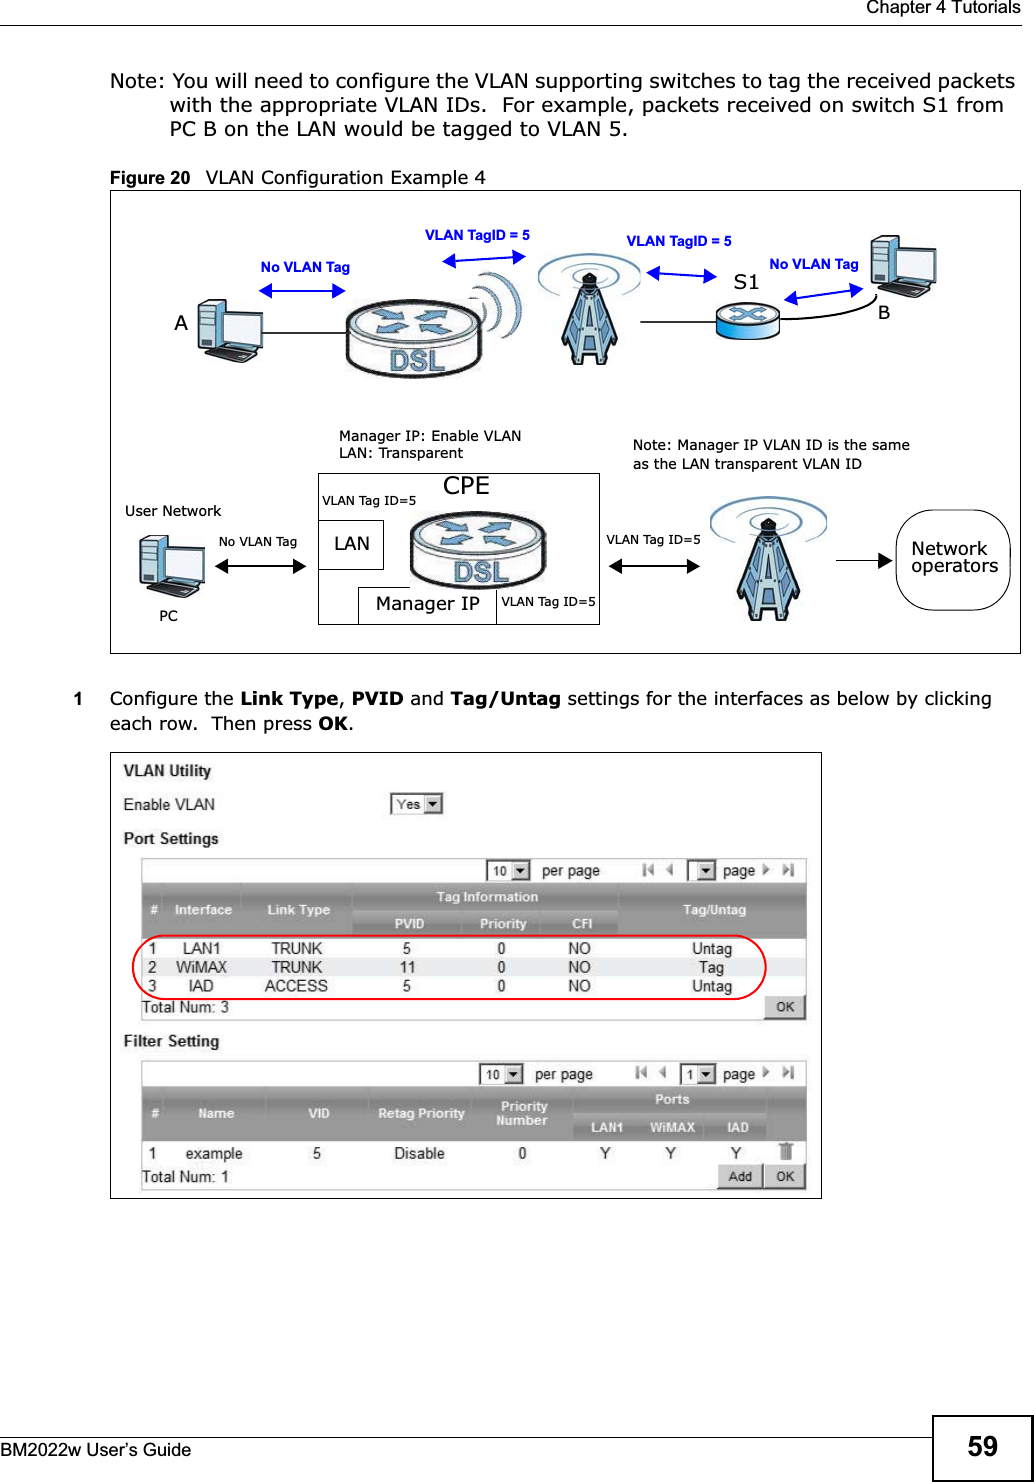  Chapter 4 TutorialsBM2022w User’s Guide 59Note: You will need to configure the VLAN supporting switches to tag the received packets with the appropriate VLAN IDs.  For example, packets received on switch S1 from PC B on the LAN would be tagged to VLAN 5.  Figure 20   VLAN Configuration Example 41Configure the Link Type,PVID and Tag/Untag settings for the interfaces as below by clicking each row.  Then press OK.AVLAN TagID = 5VLAN TagID = 5BS1No VLAN Tag No VLAN TagCPELANManager IPNo VLAN TagUser NetworkPCNetworkoperatorsManager IP: Enable VLAN LAN: Transparent Note: Manager IP VLAN ID is the same as the LAN transparent VLAN IDVLAN Tag ID=5VLAN Tag ID=5VLAN Tag ID=5